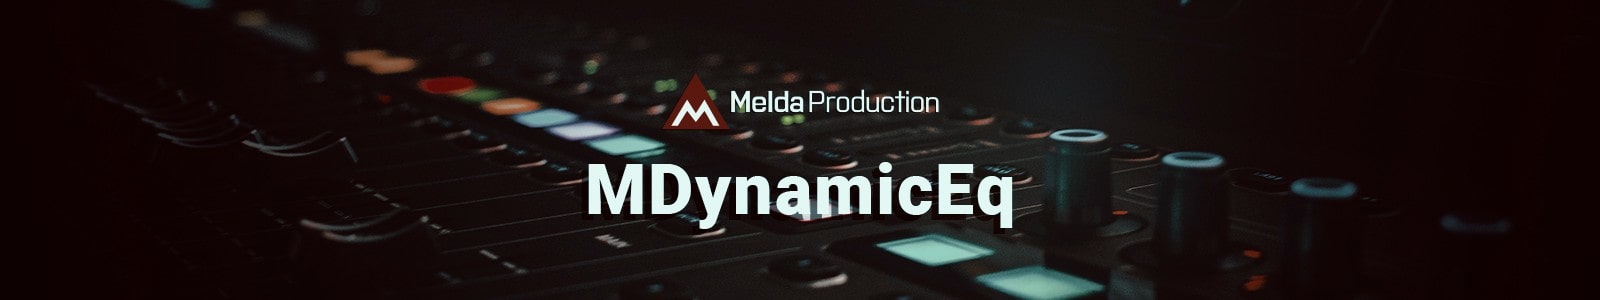 MDynamicEq by MeldaProduction